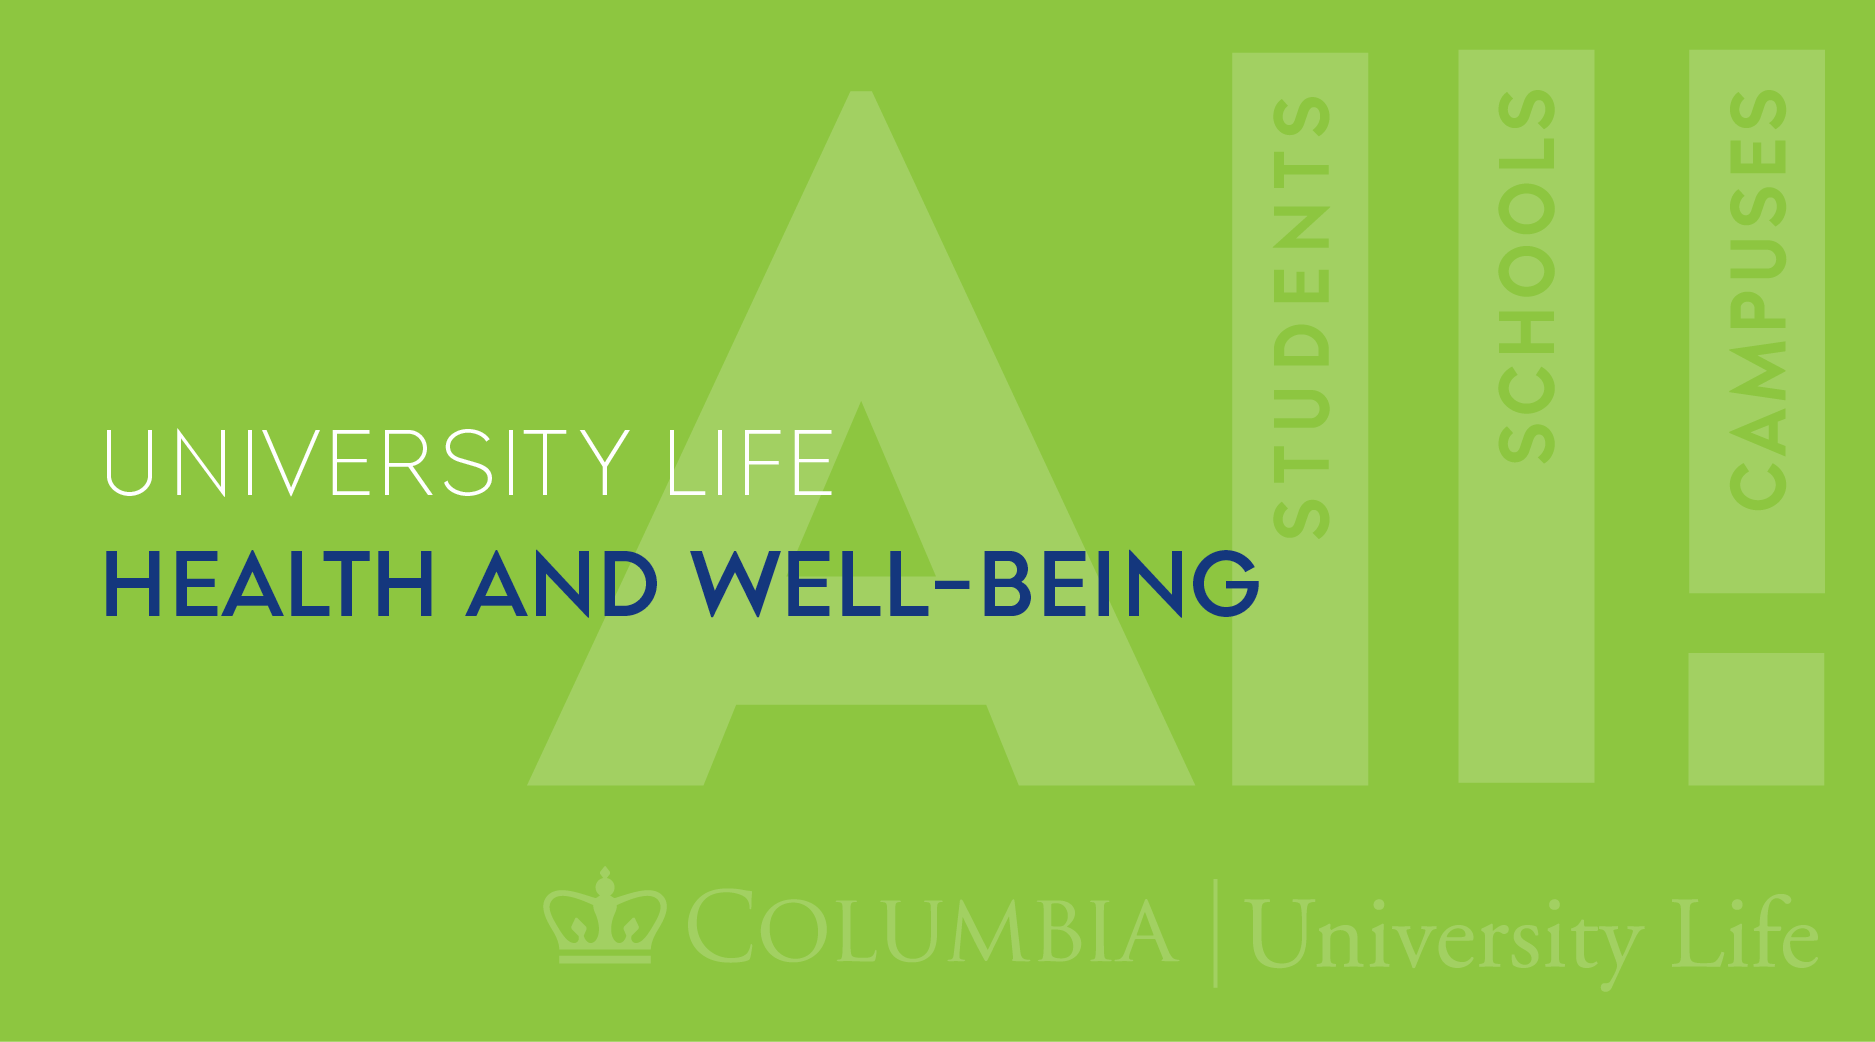 Background: light green with a white overlay of the University Life logo Text: "University Life Health and Well-Being" 